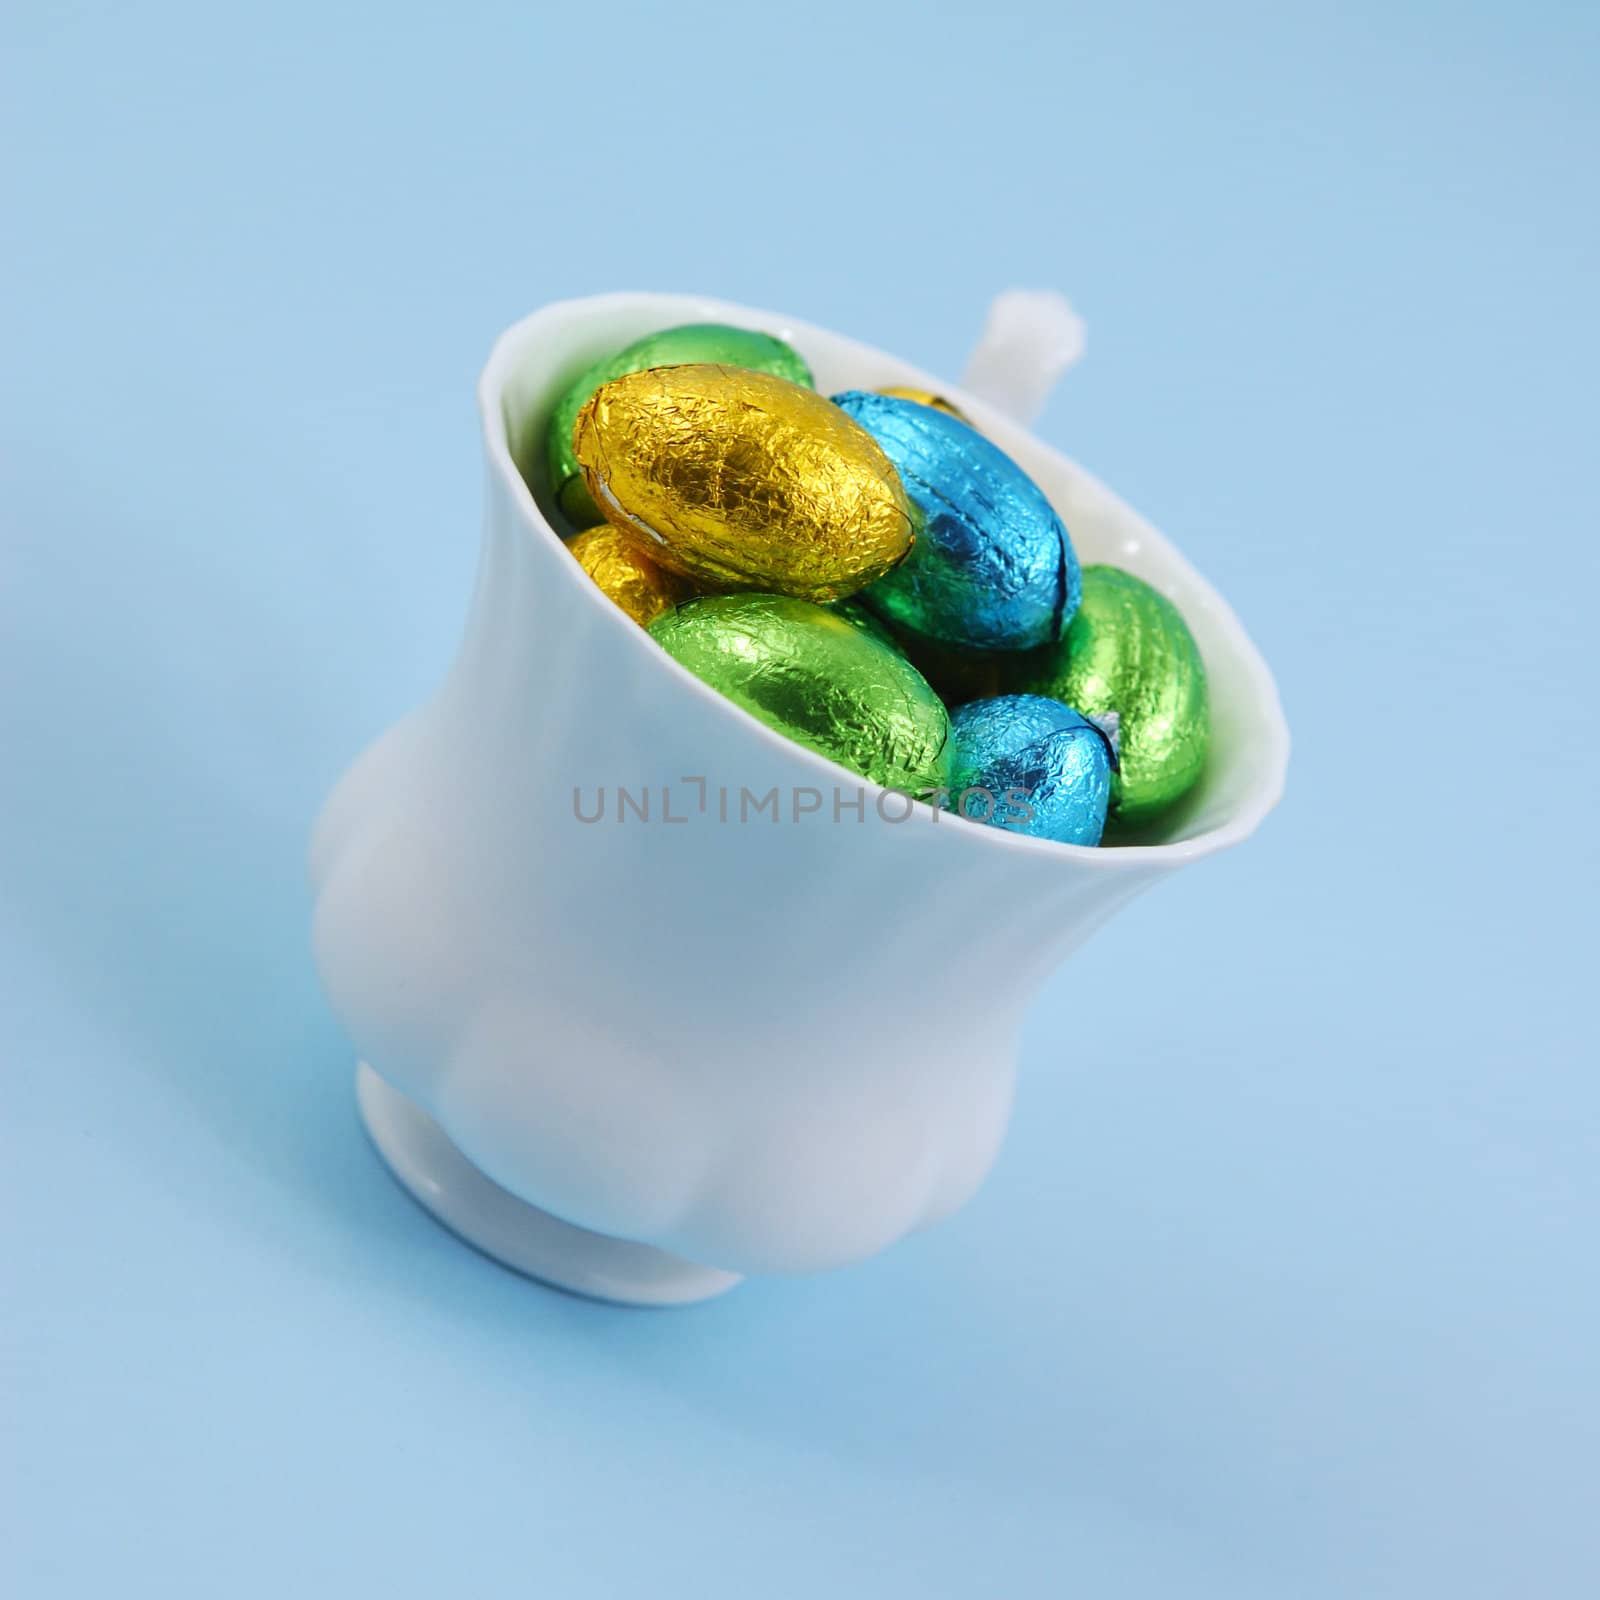 chocolate easter eggs in cup
eggs on blue background
easter eggs in white cup